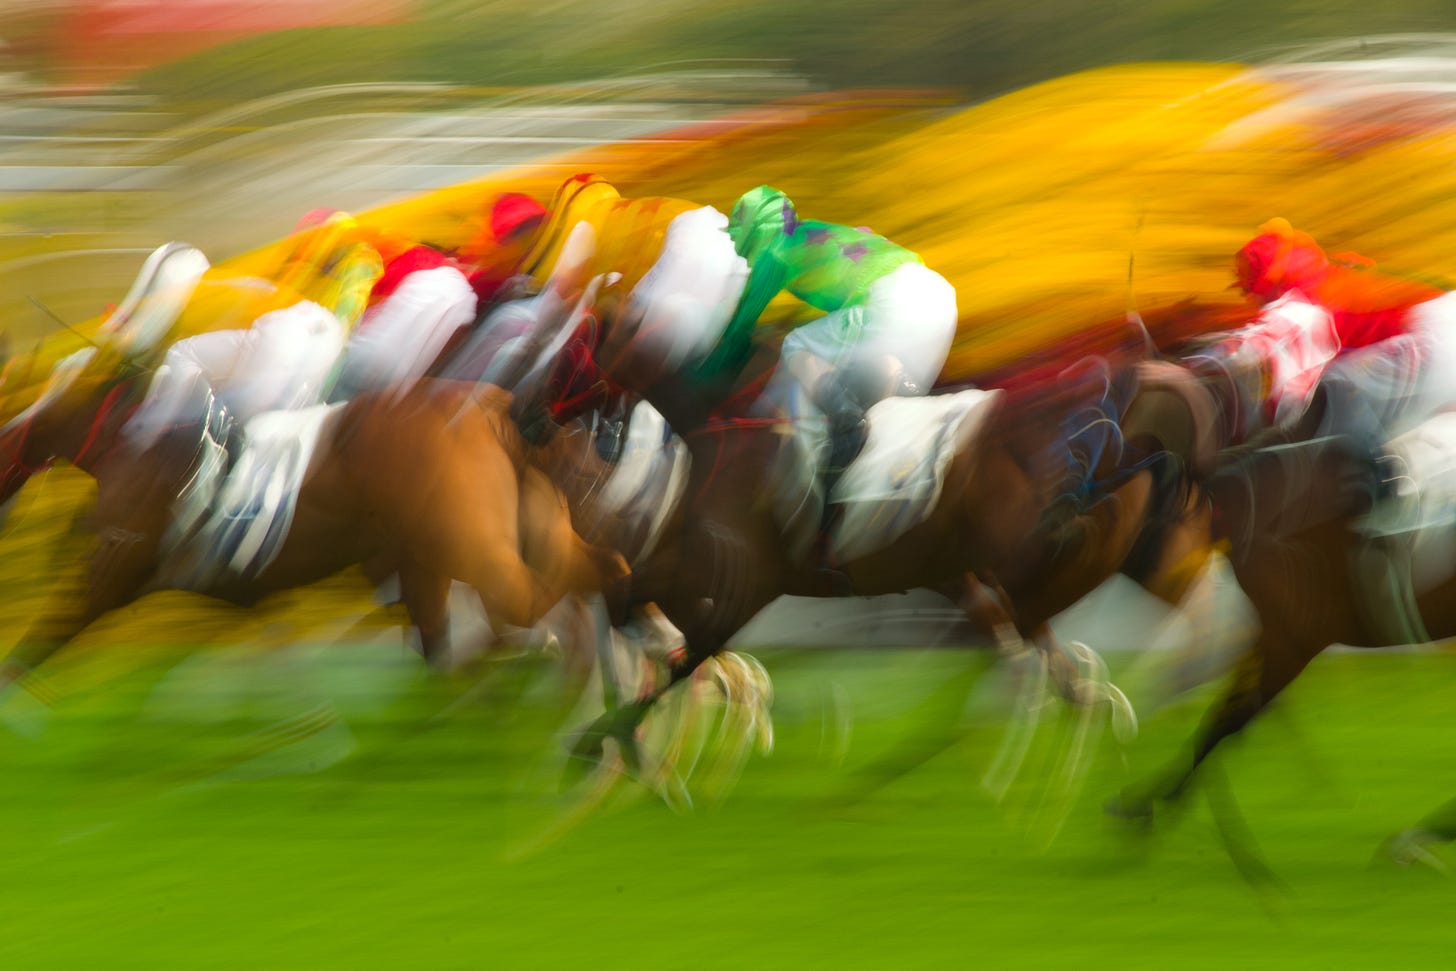 Blurry racehorses and jockeys in bright multicolored silks on a grass track. No mud, dry, probably pretty fast.I've played a horse or two in my life.